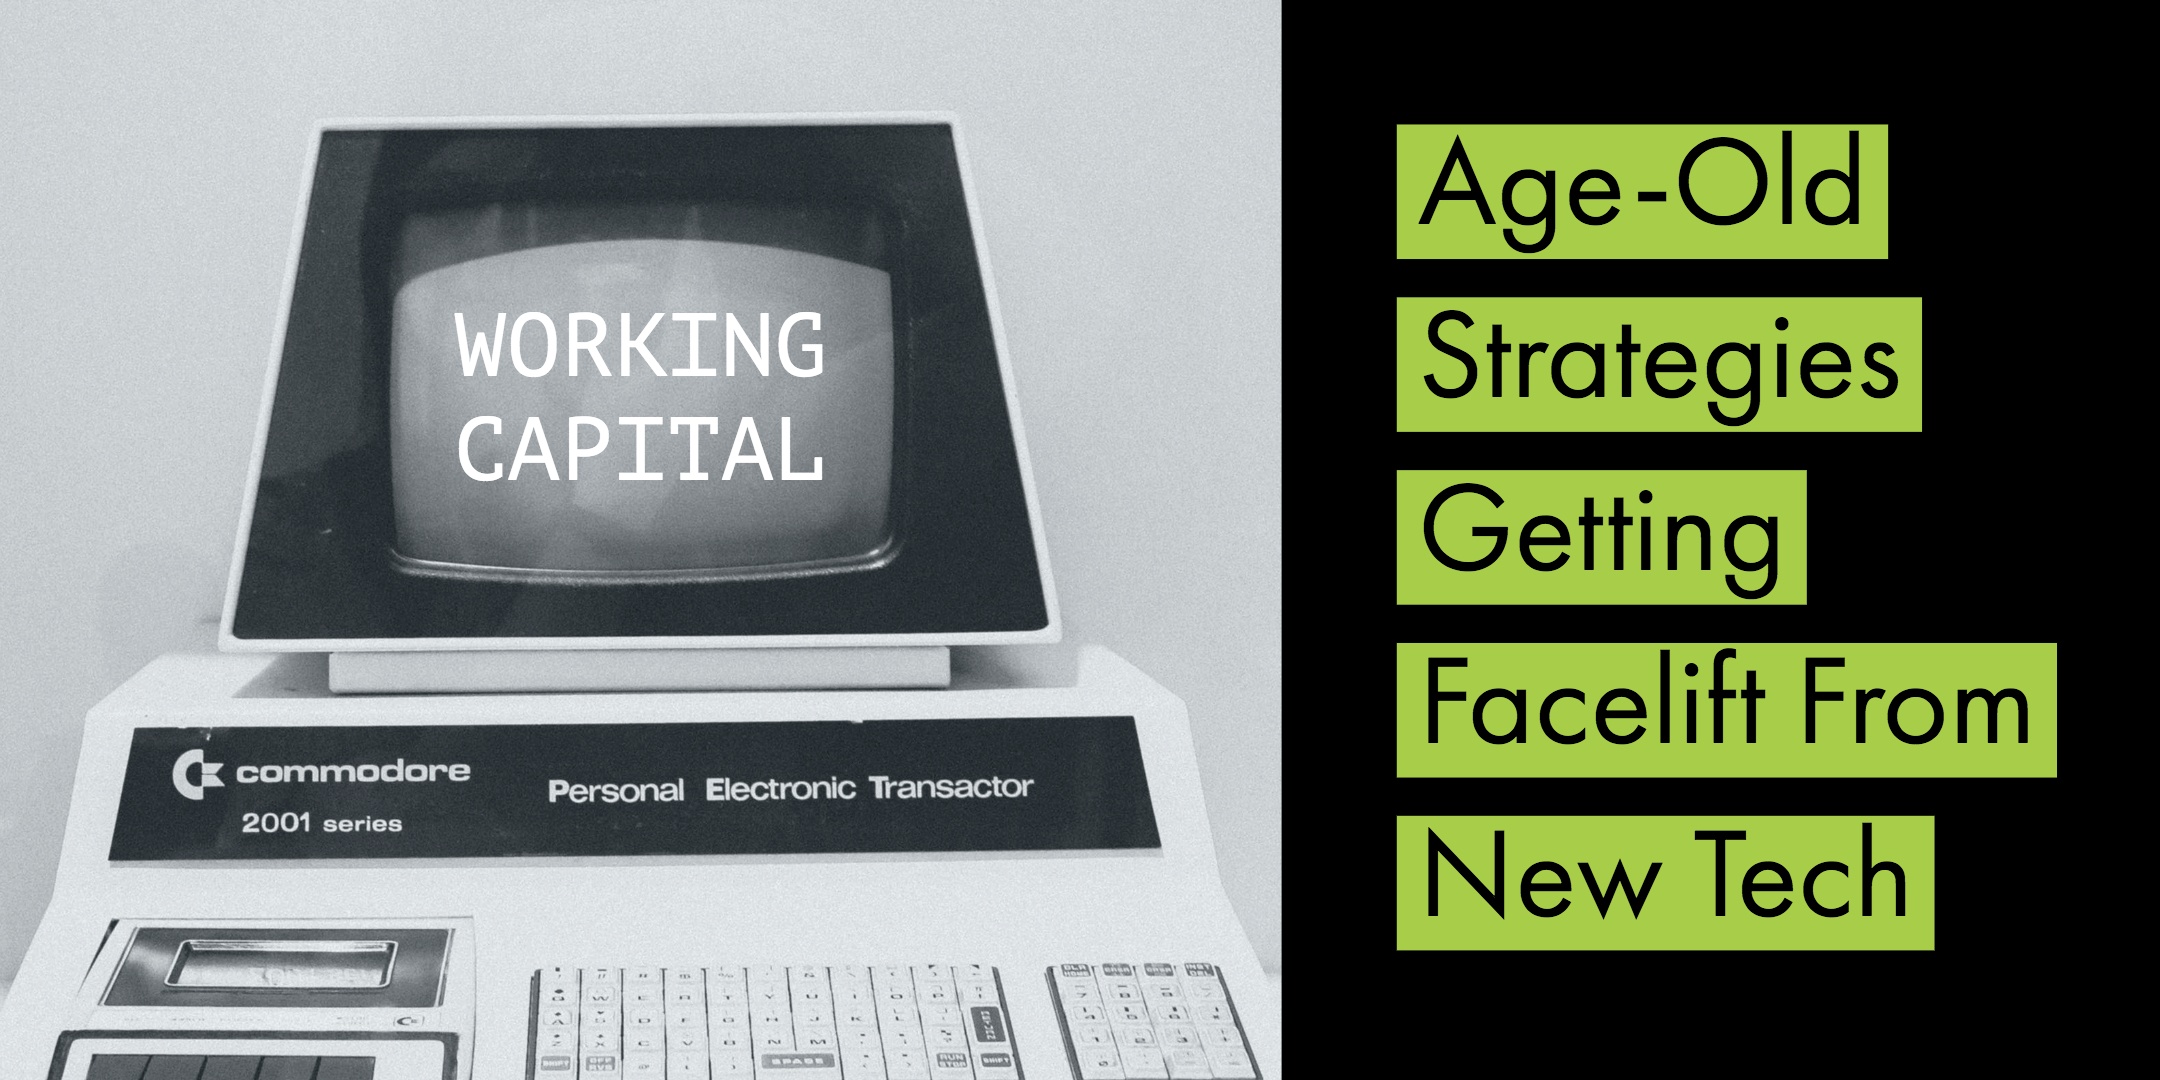 Working Capital_ Age-Old Strategies Getting Facelift From New Tech